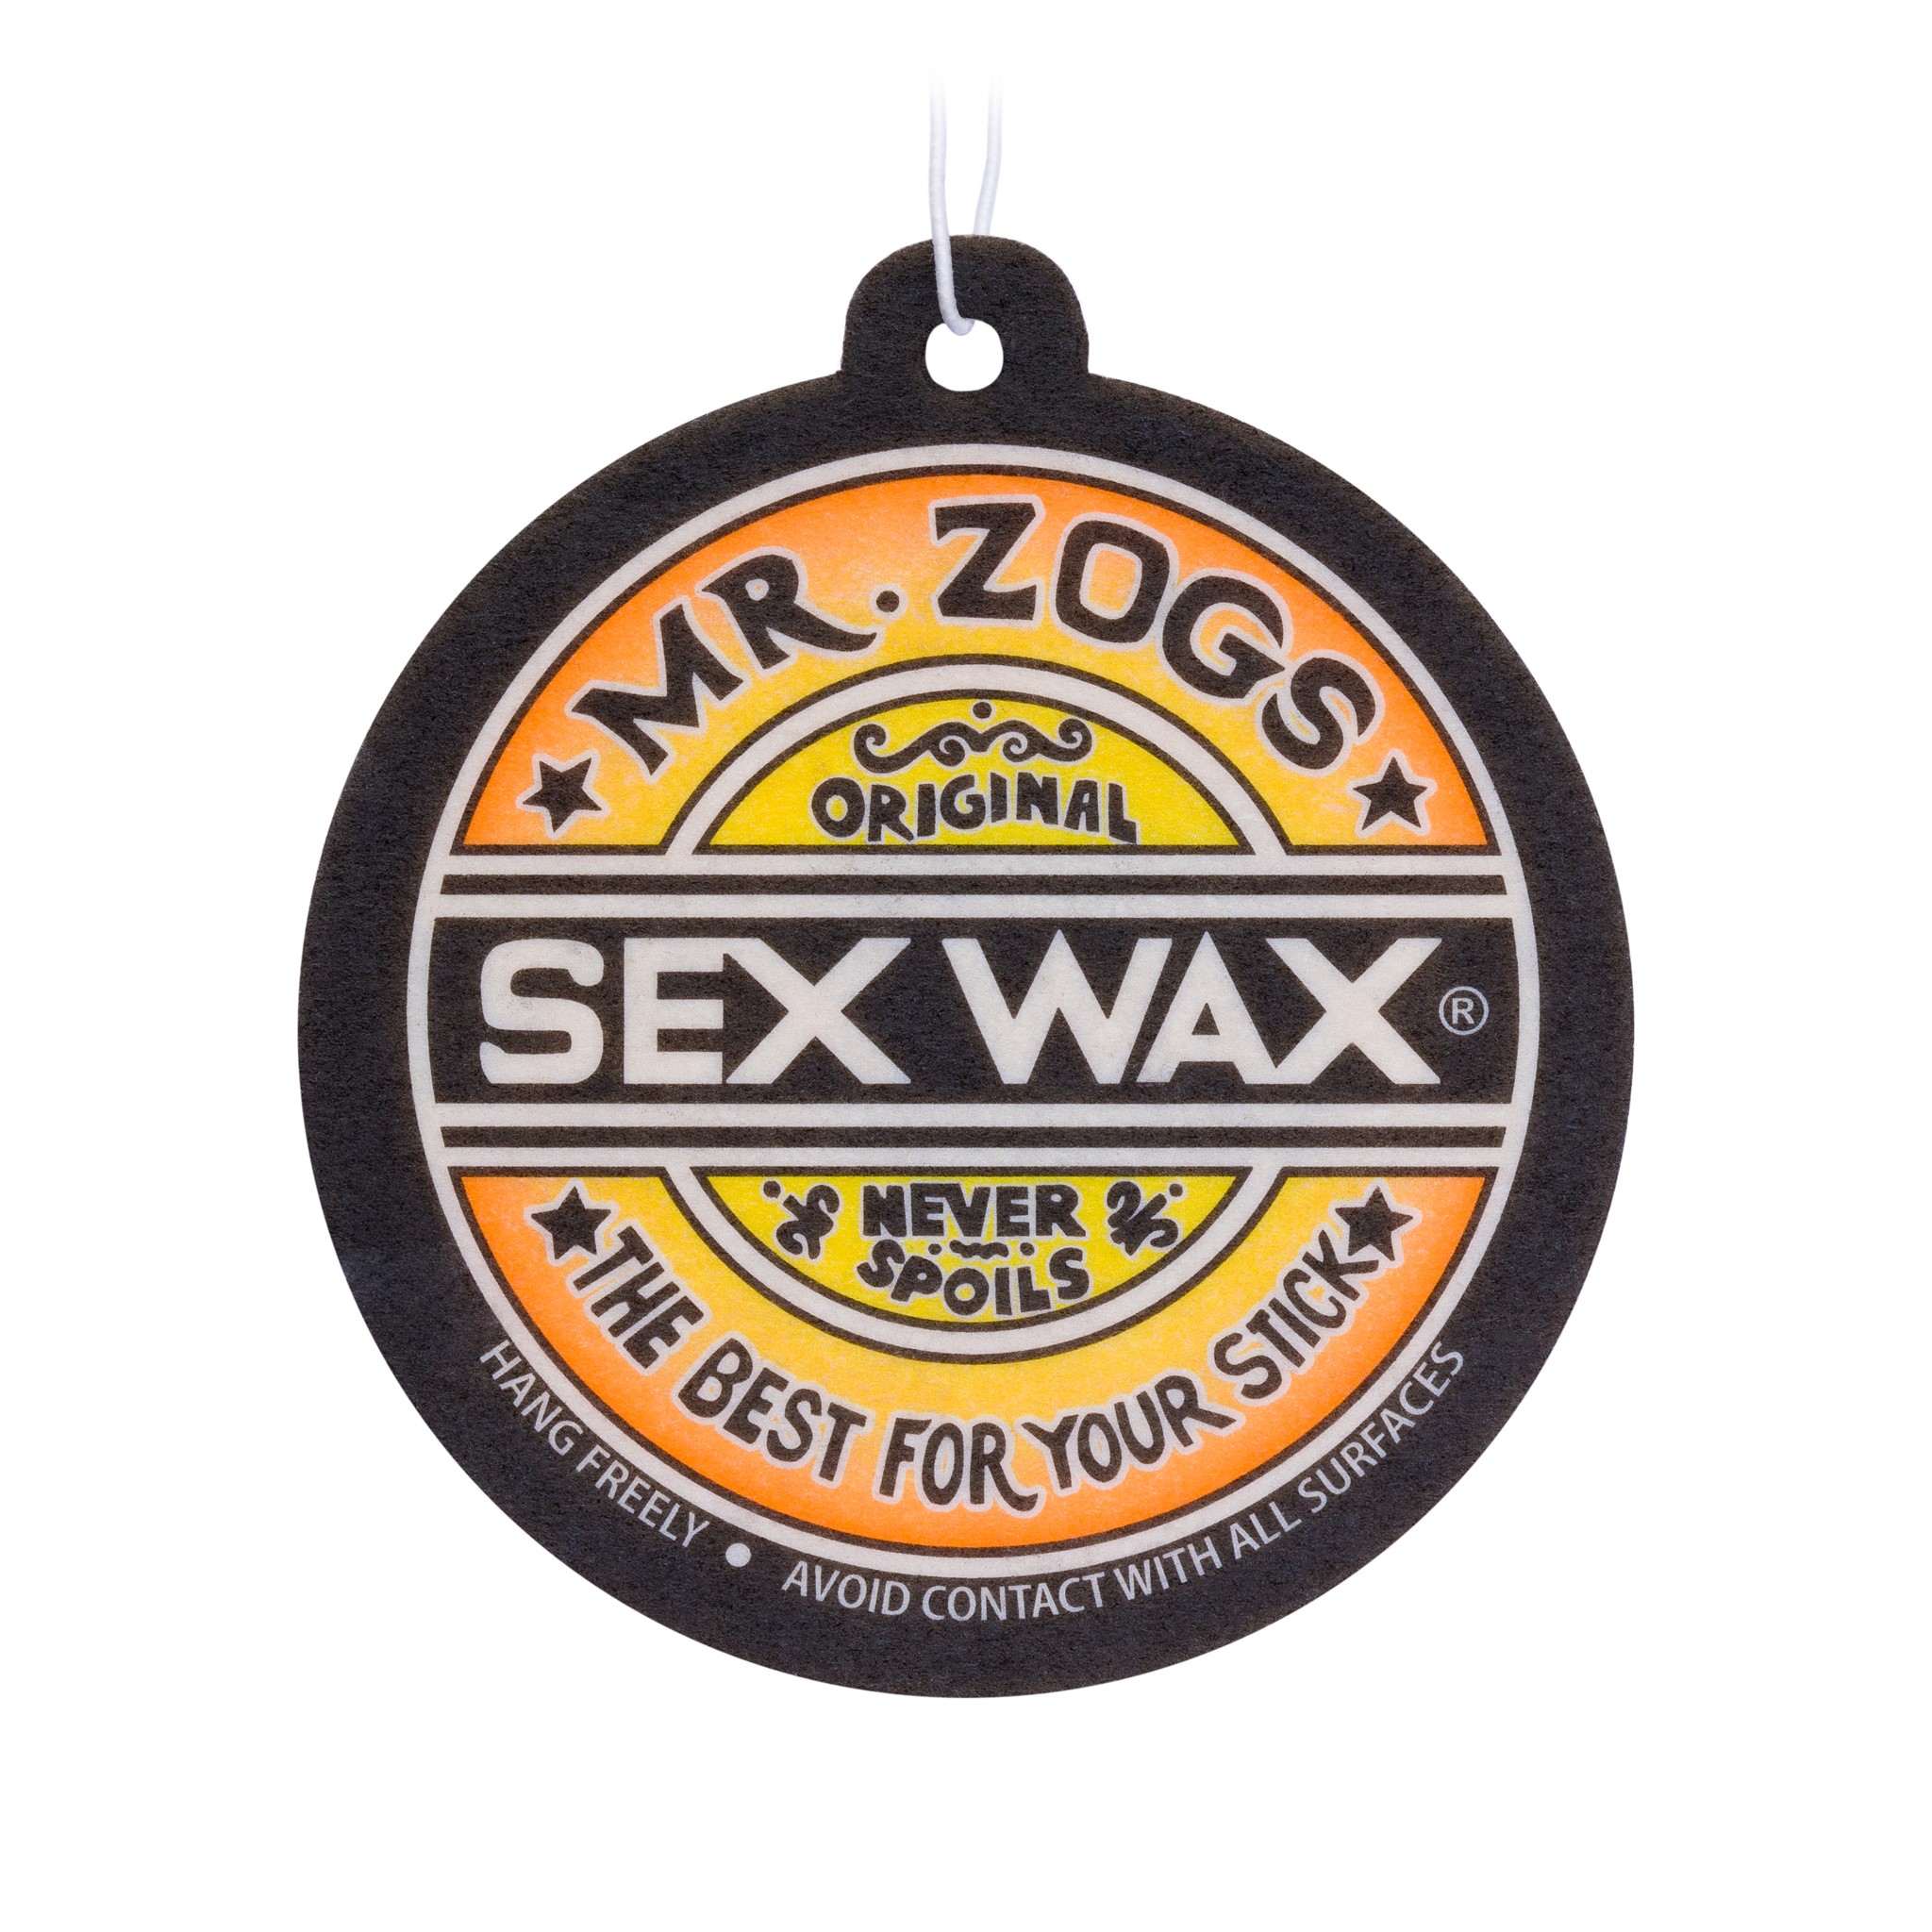 2024 Sex Wax Air Freshener Bundle SWAF-MP - Coconut Grape Strawberry and  Pineapple